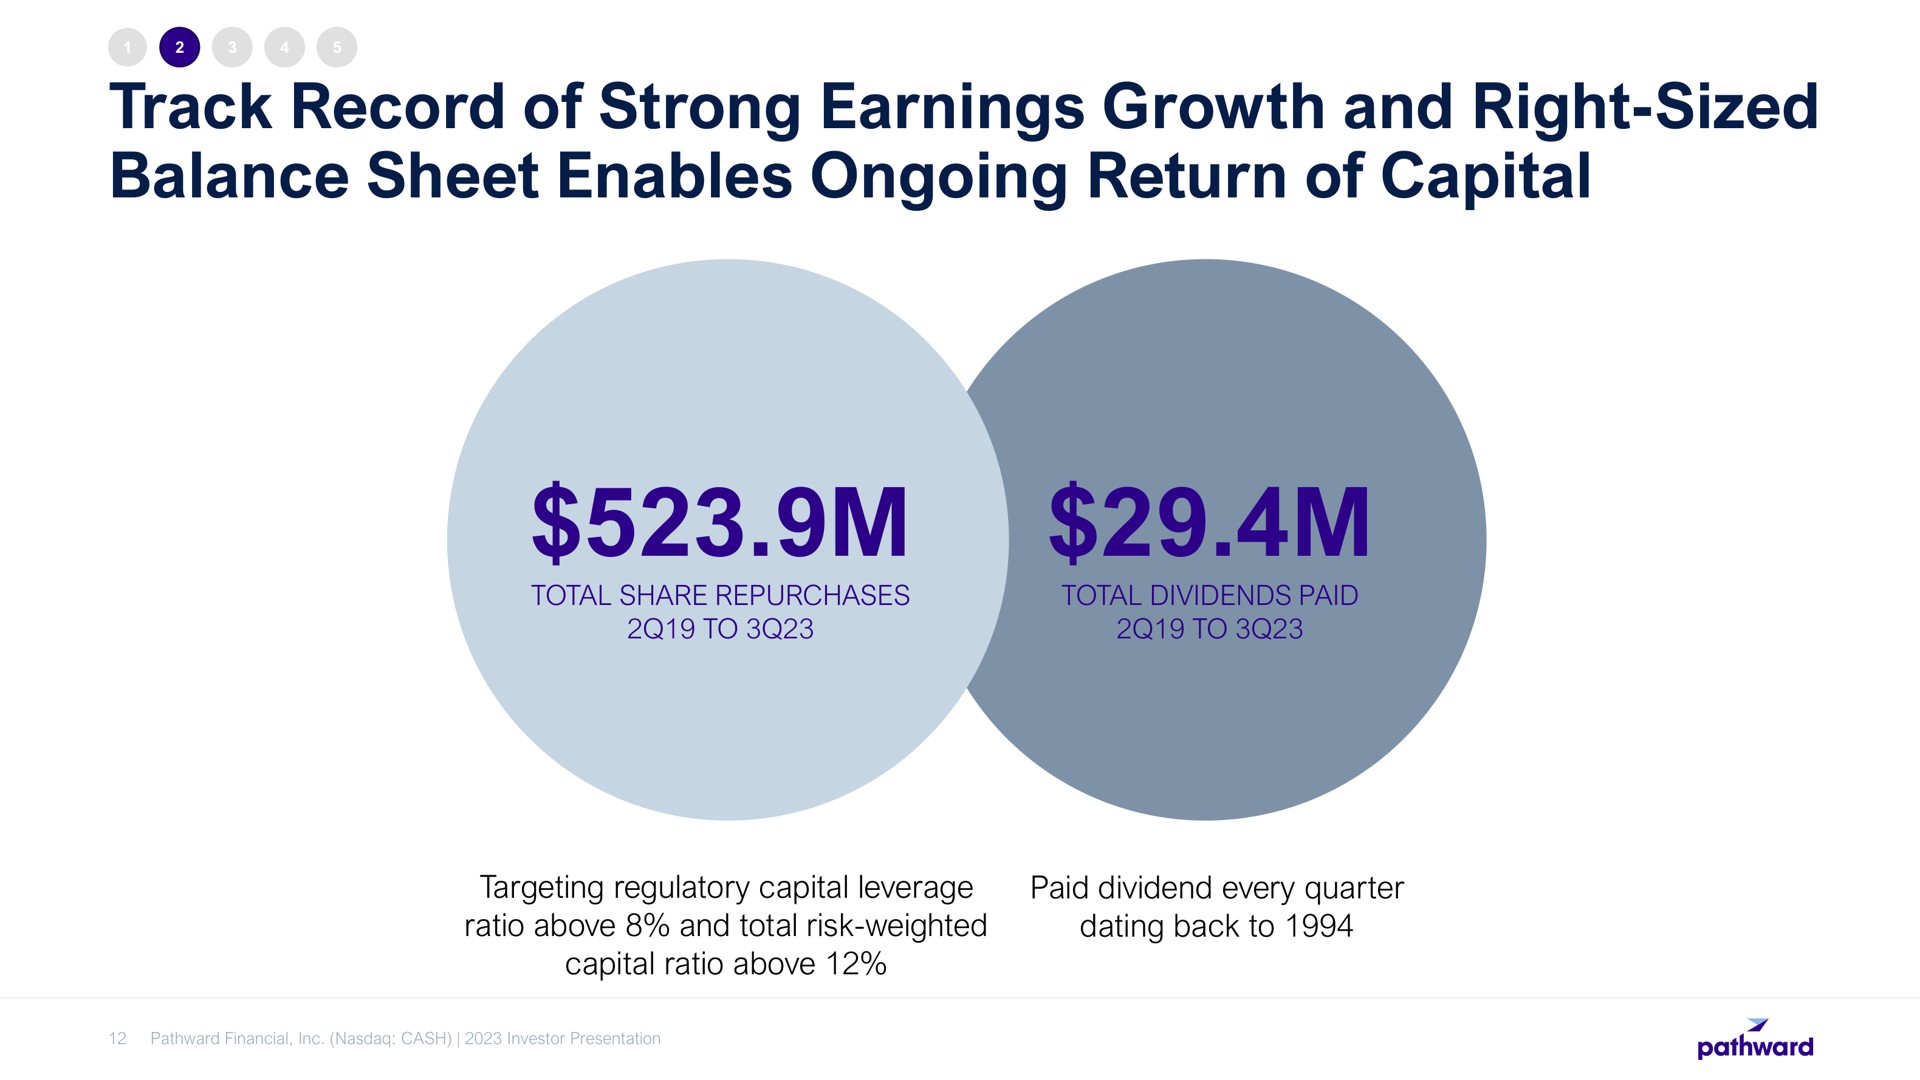 track record of strong earnings growth and right sized balance sheet enables ongoing return of capital | Pathward Financial